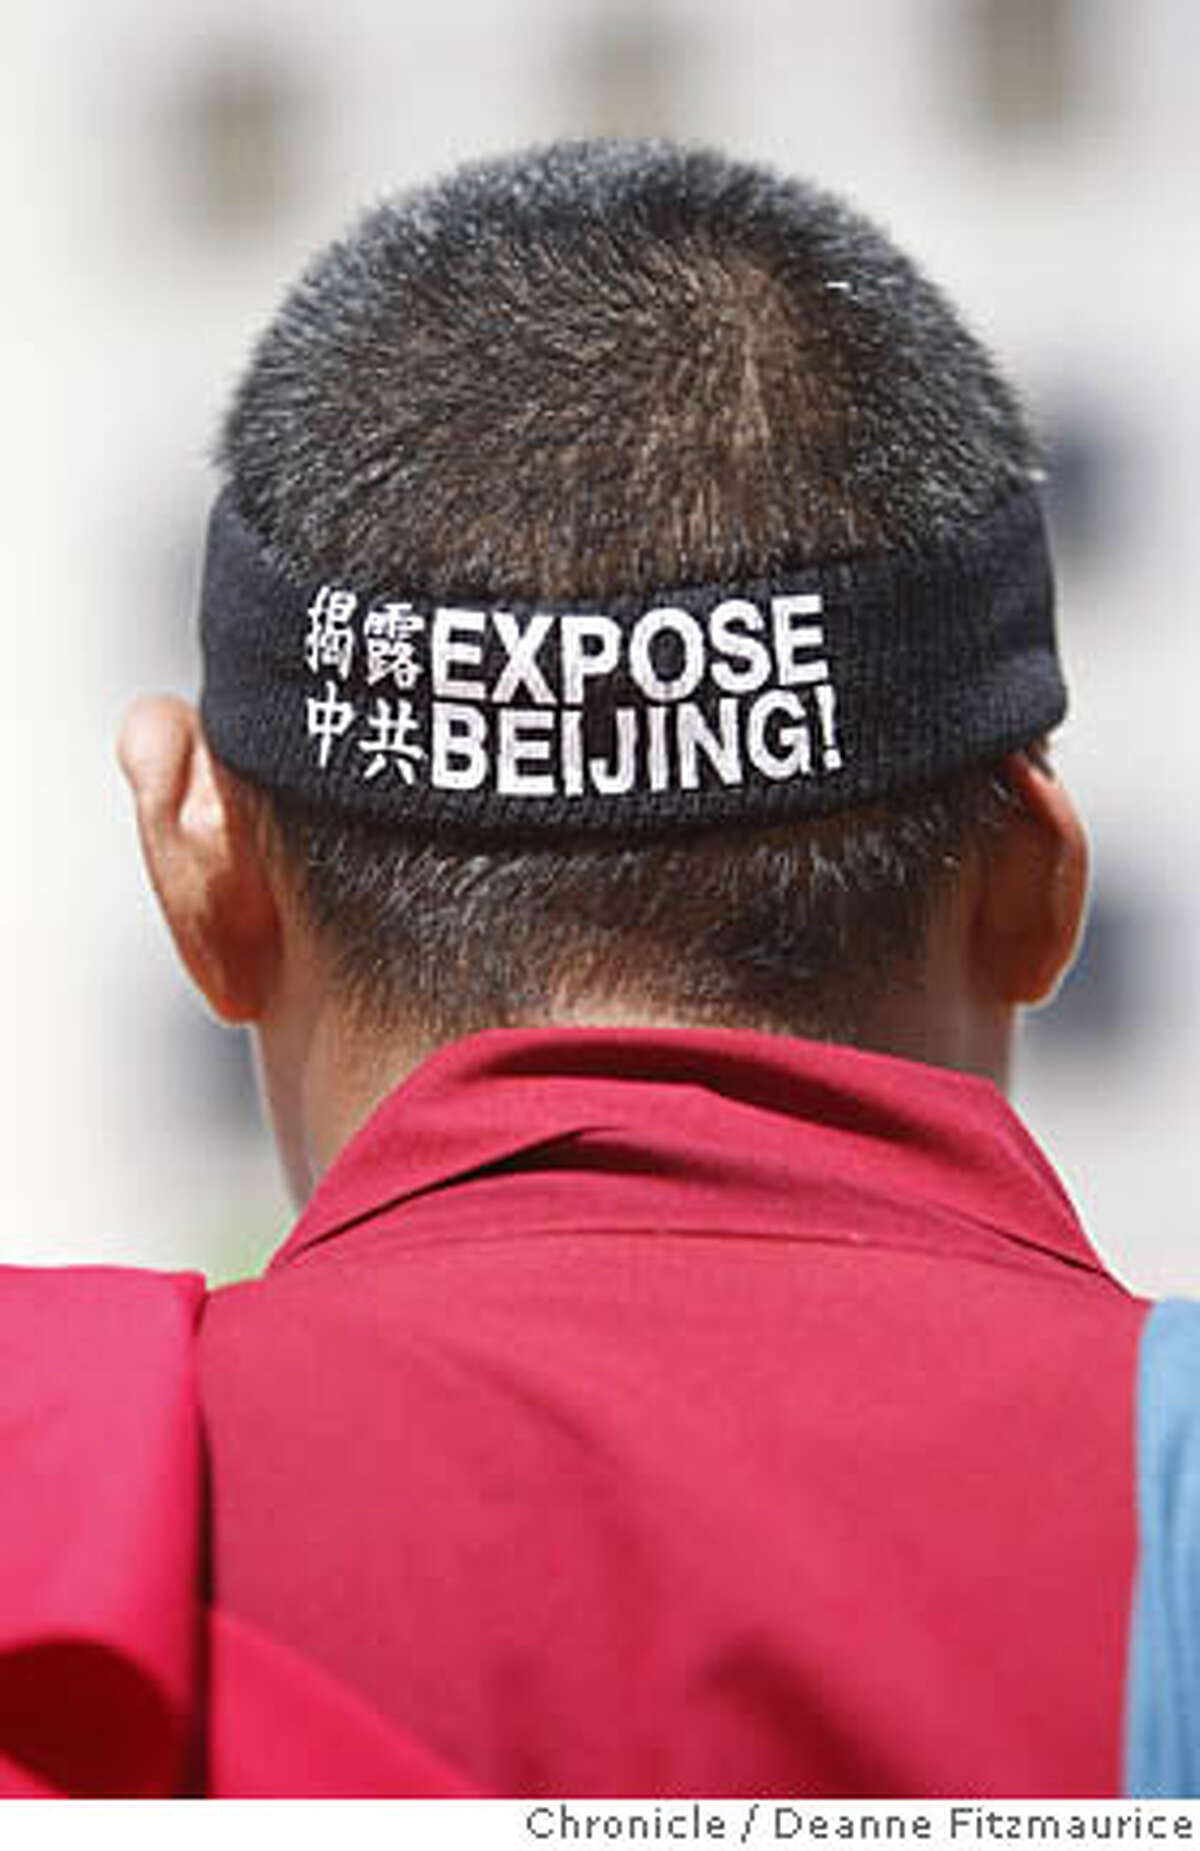 Thupten Tendhar, a buddhist monk from Berkeley, wore a headband as he attended the rally for the start of the Human Rights Torch Relay on April 5, 2008 in San Francisco, Calif. Photo by Deanne Fitzmaurice / San Francisco Chronicle